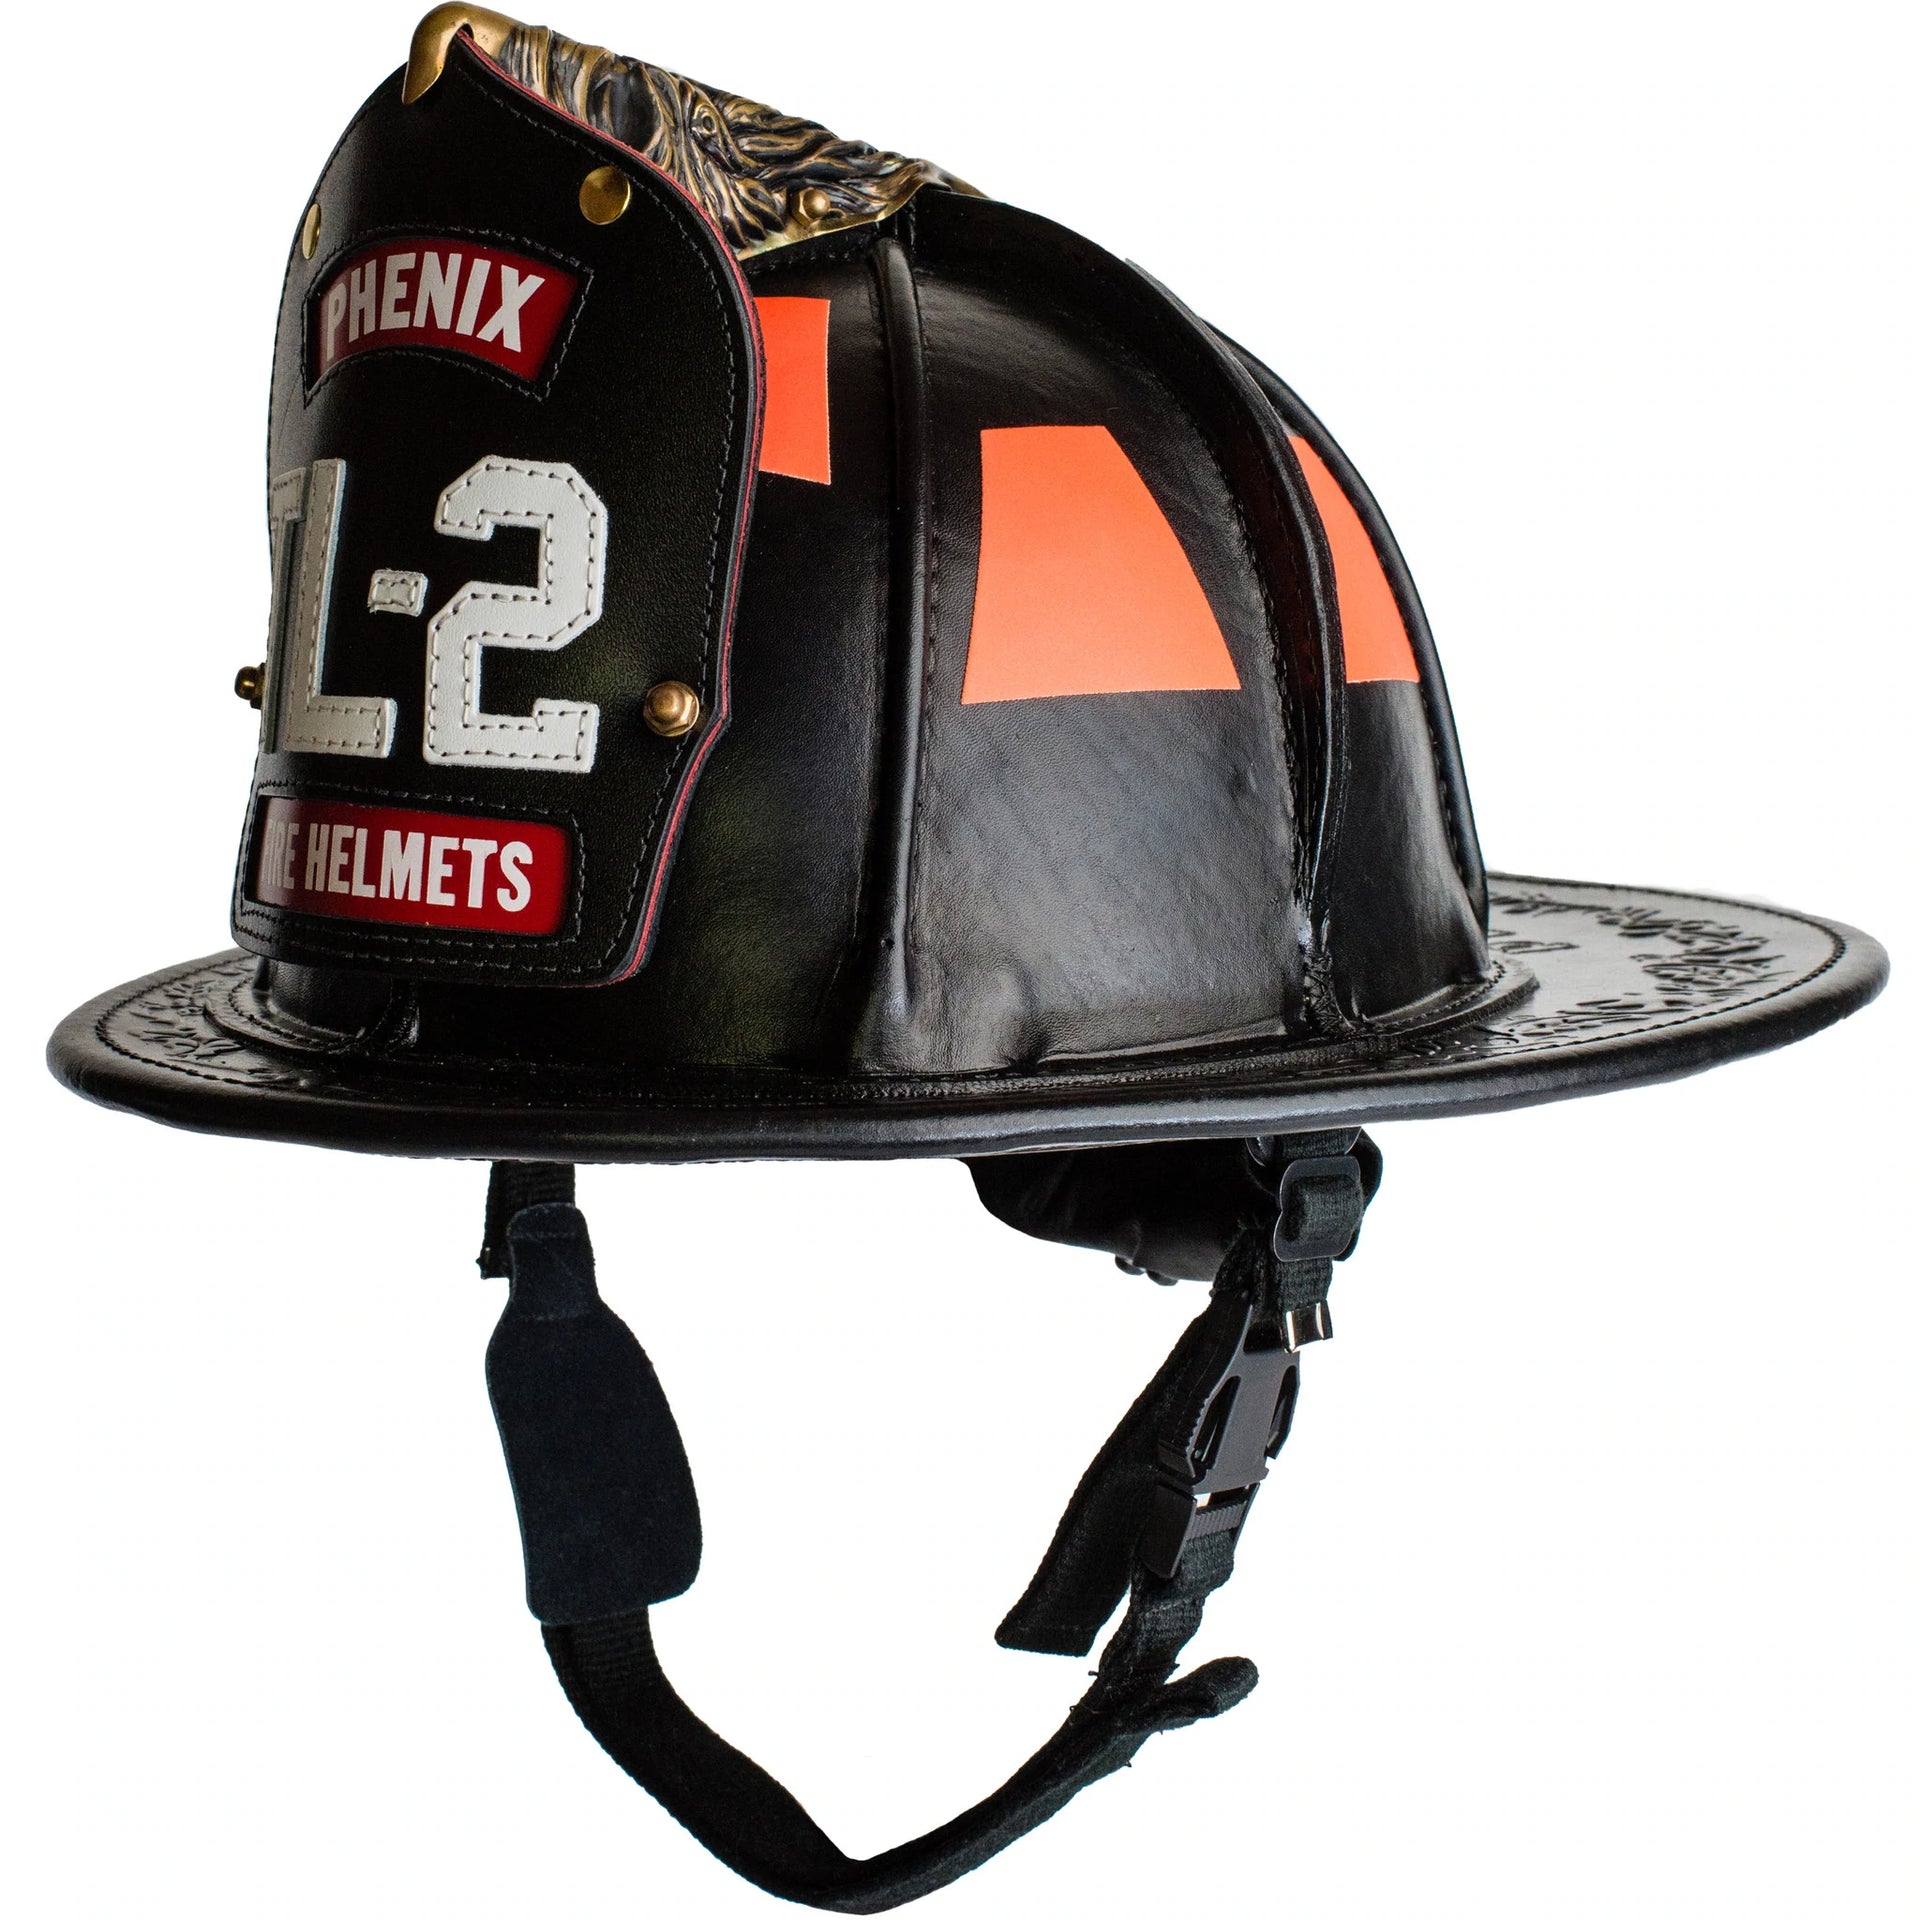 Phenix Technology TL2 Traditional Leather Fire Helmet | The Fire Center | Fuego Fire Center | FIREFIGHTER GEAR | The TL-2 Traditional Leather fire helmet is the lightest NFPA complaint authentic leather helmet on the market. Worn by firefighters worldwide, the TL-2 combines tradition and modern safety in a handcrafted masterpiece.  Compliant to current OSHA and NFPA 1971 standards.  